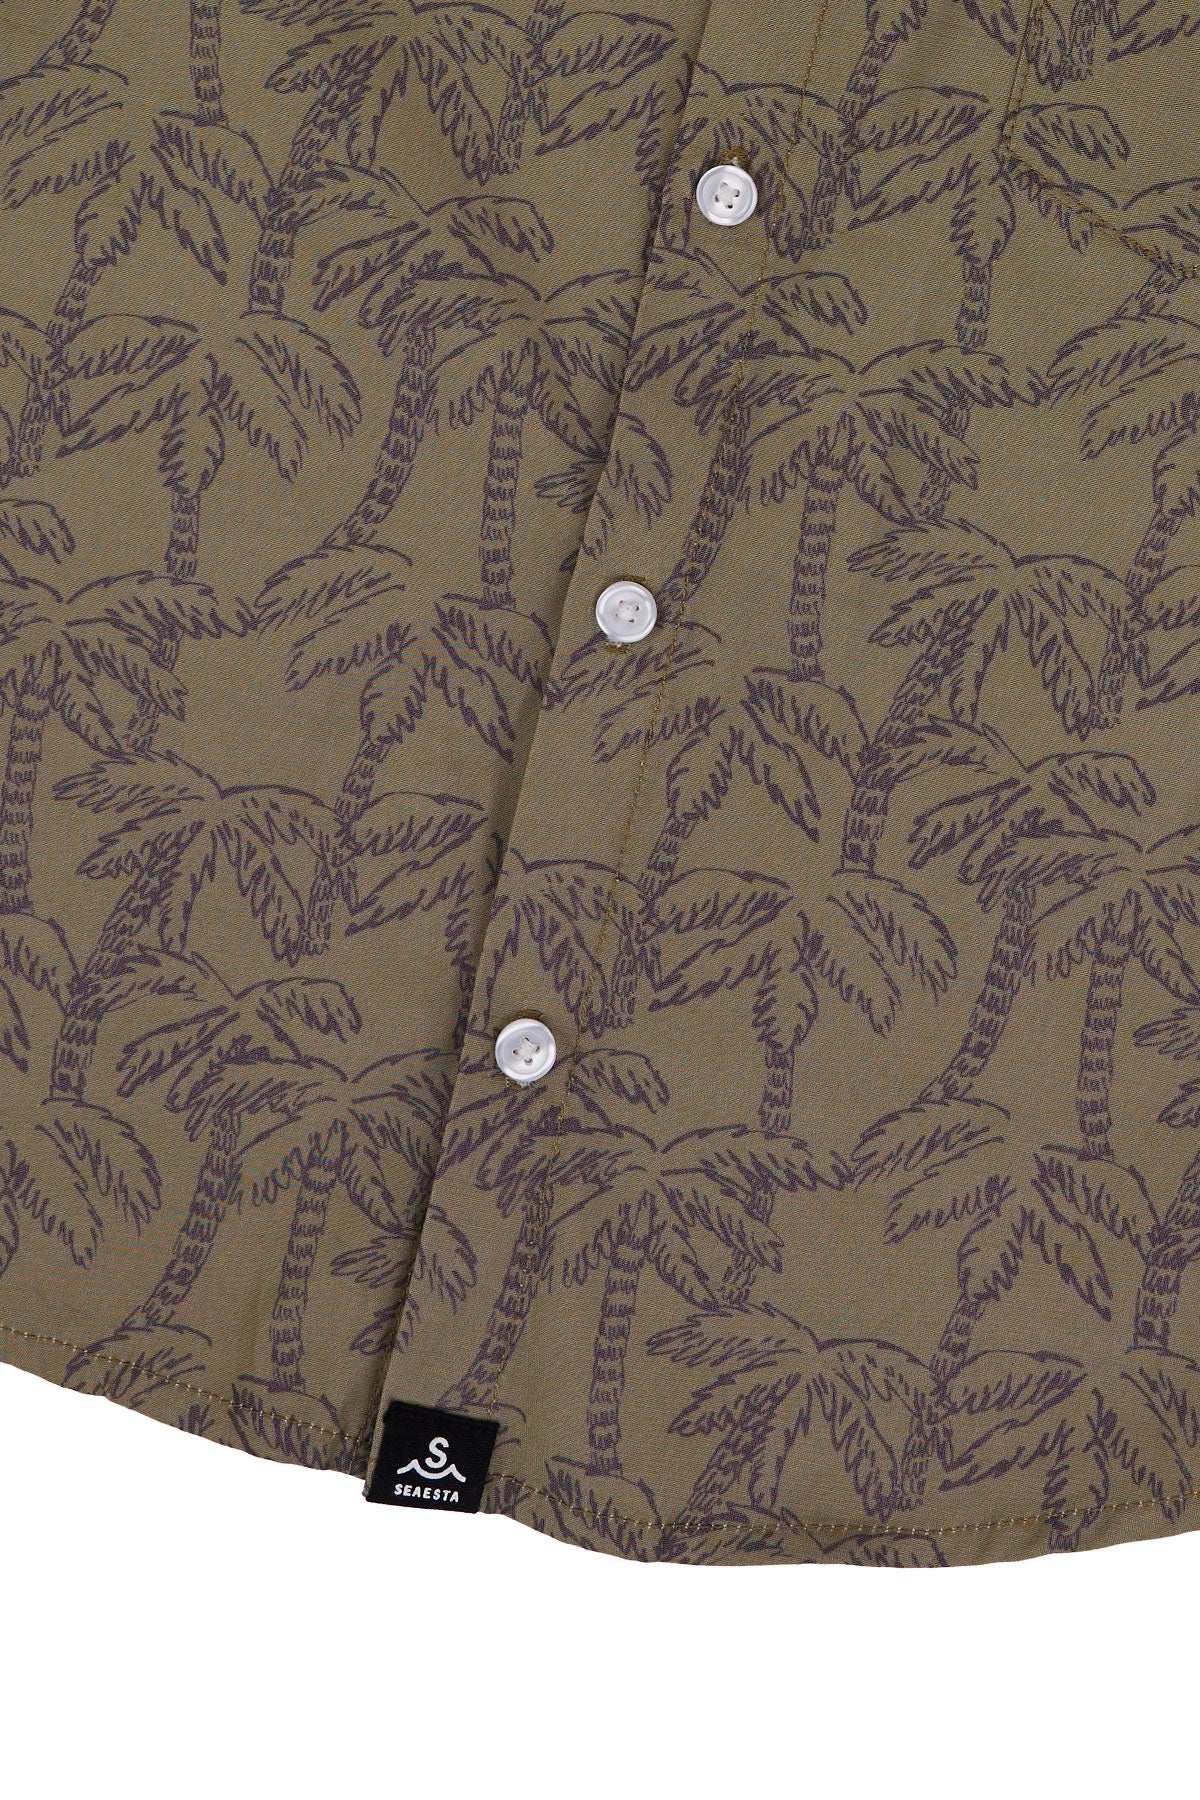 Custom, hand-drawn palm tree print made exclusively for Seaesta Surf. Seaesta's signature button up shirt in a hand-drawn palm tree print. Features a modern, slim fit for the raddest kids around.